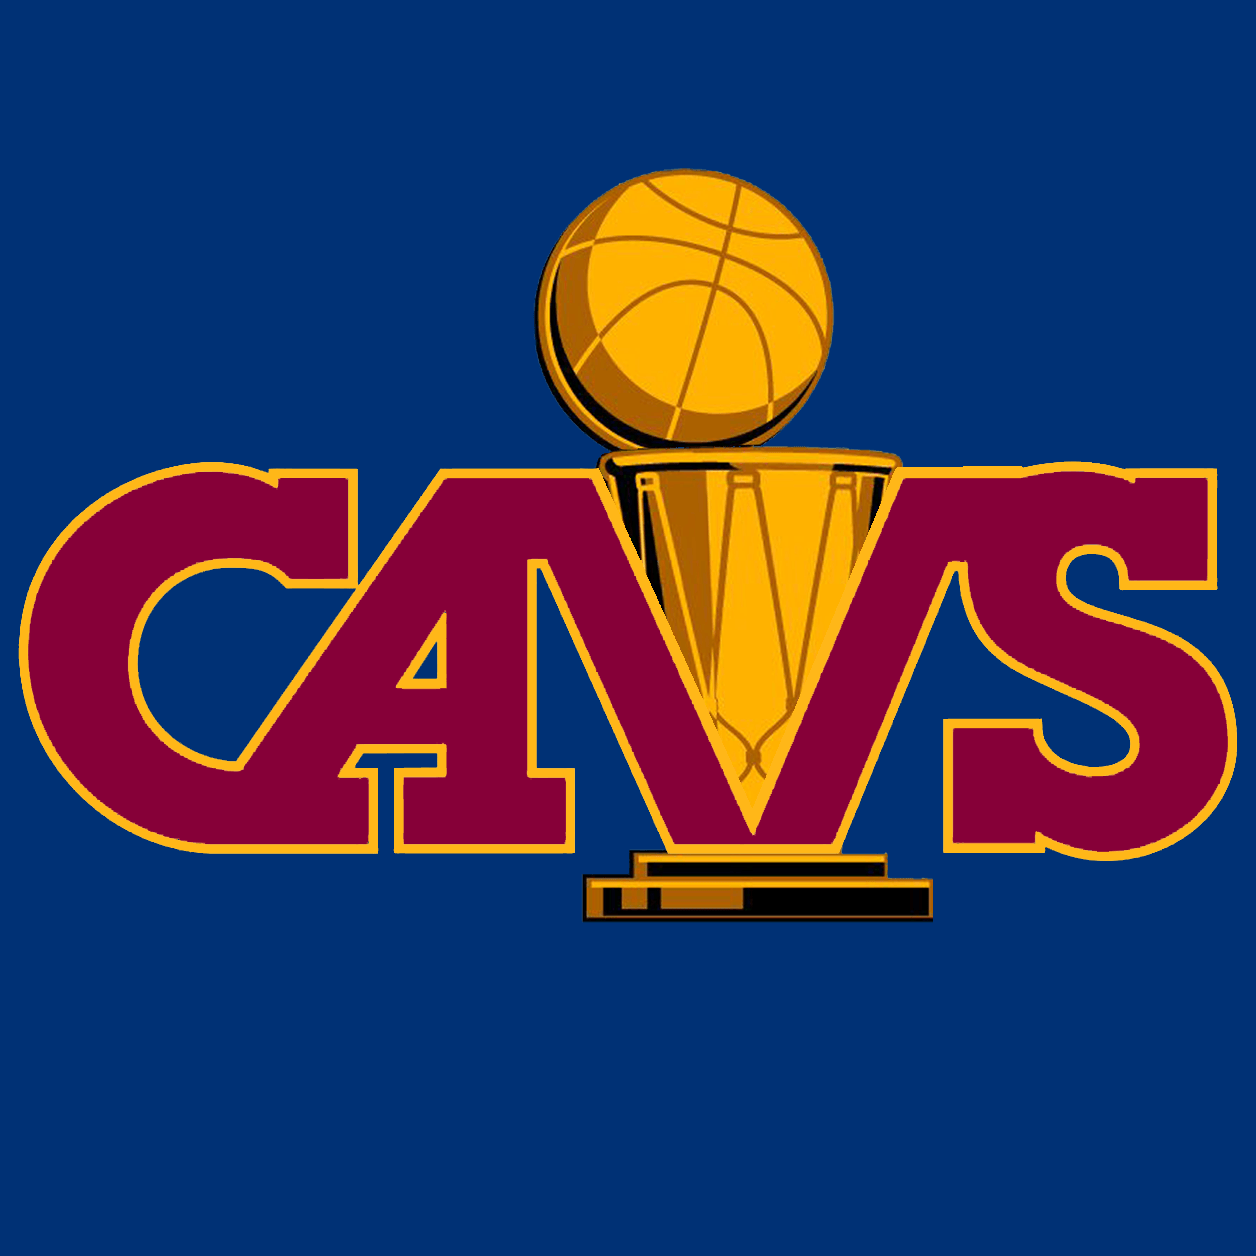 Cavs Logo - Present Cavs Colors - Old School Cavs Logo with the Championship ...